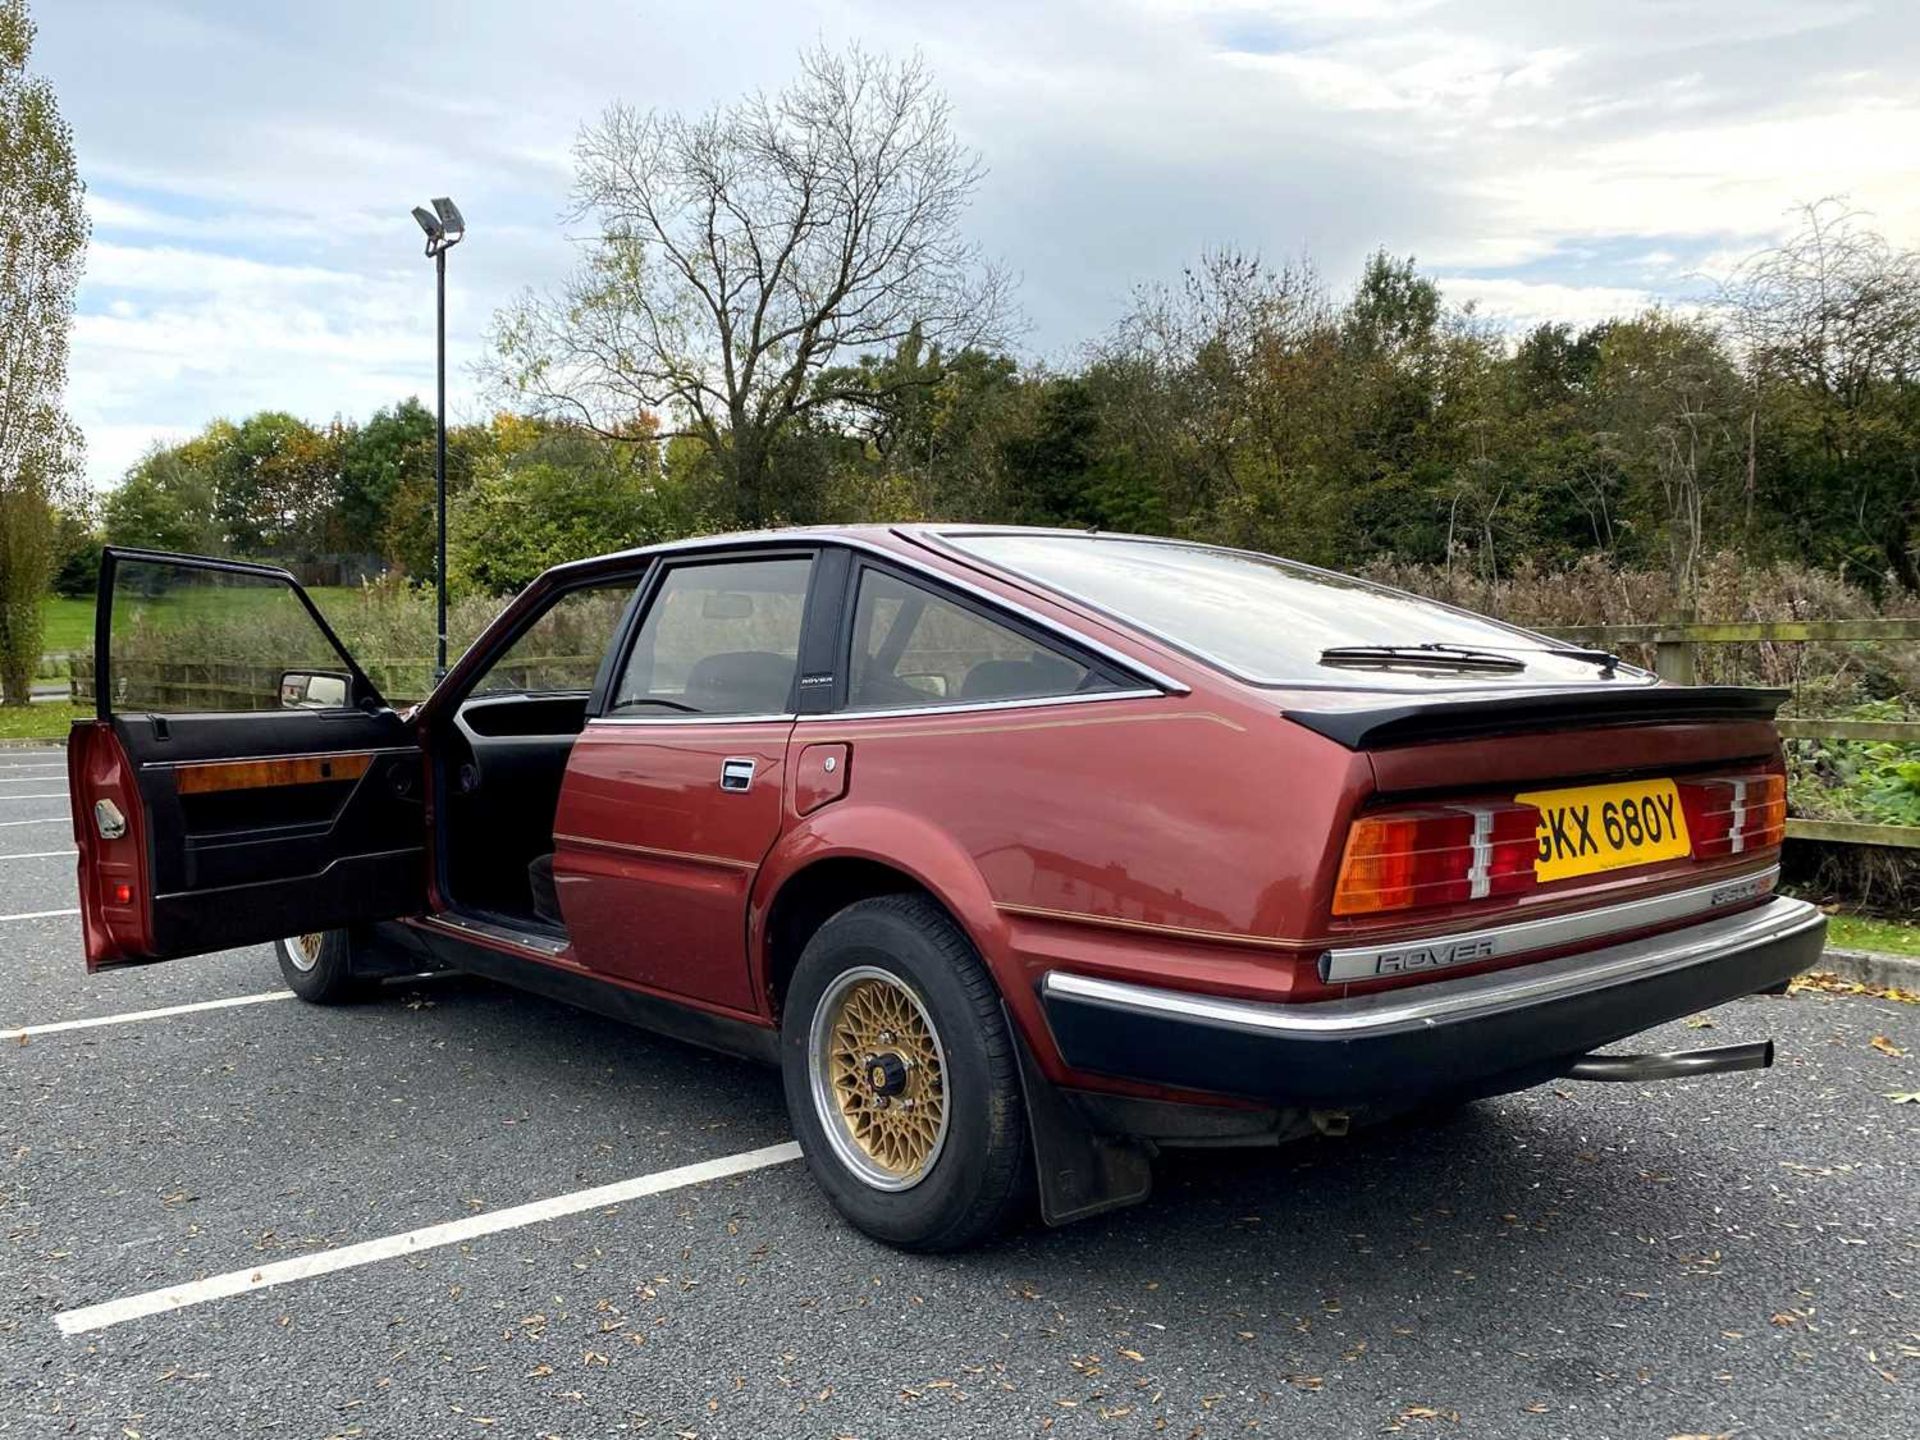 1982 Rover SD1 3500 SE Only 29,000 miles - Image 20 of 100